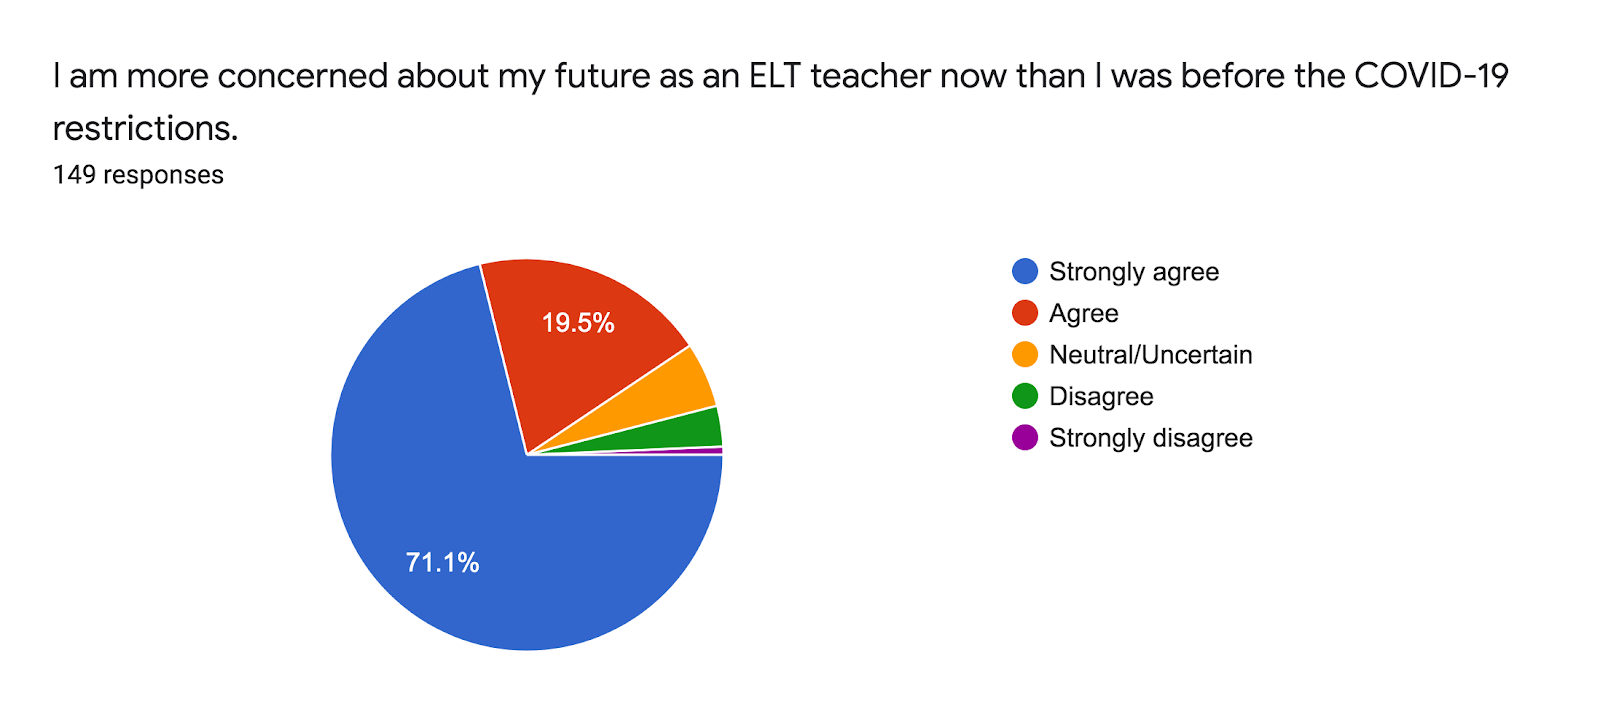 Forms response chart. Question title: I am more concerned about my future as an ELT teacher now than I was before the COVID-19 restrictions.. Number of responses: 149 responses.